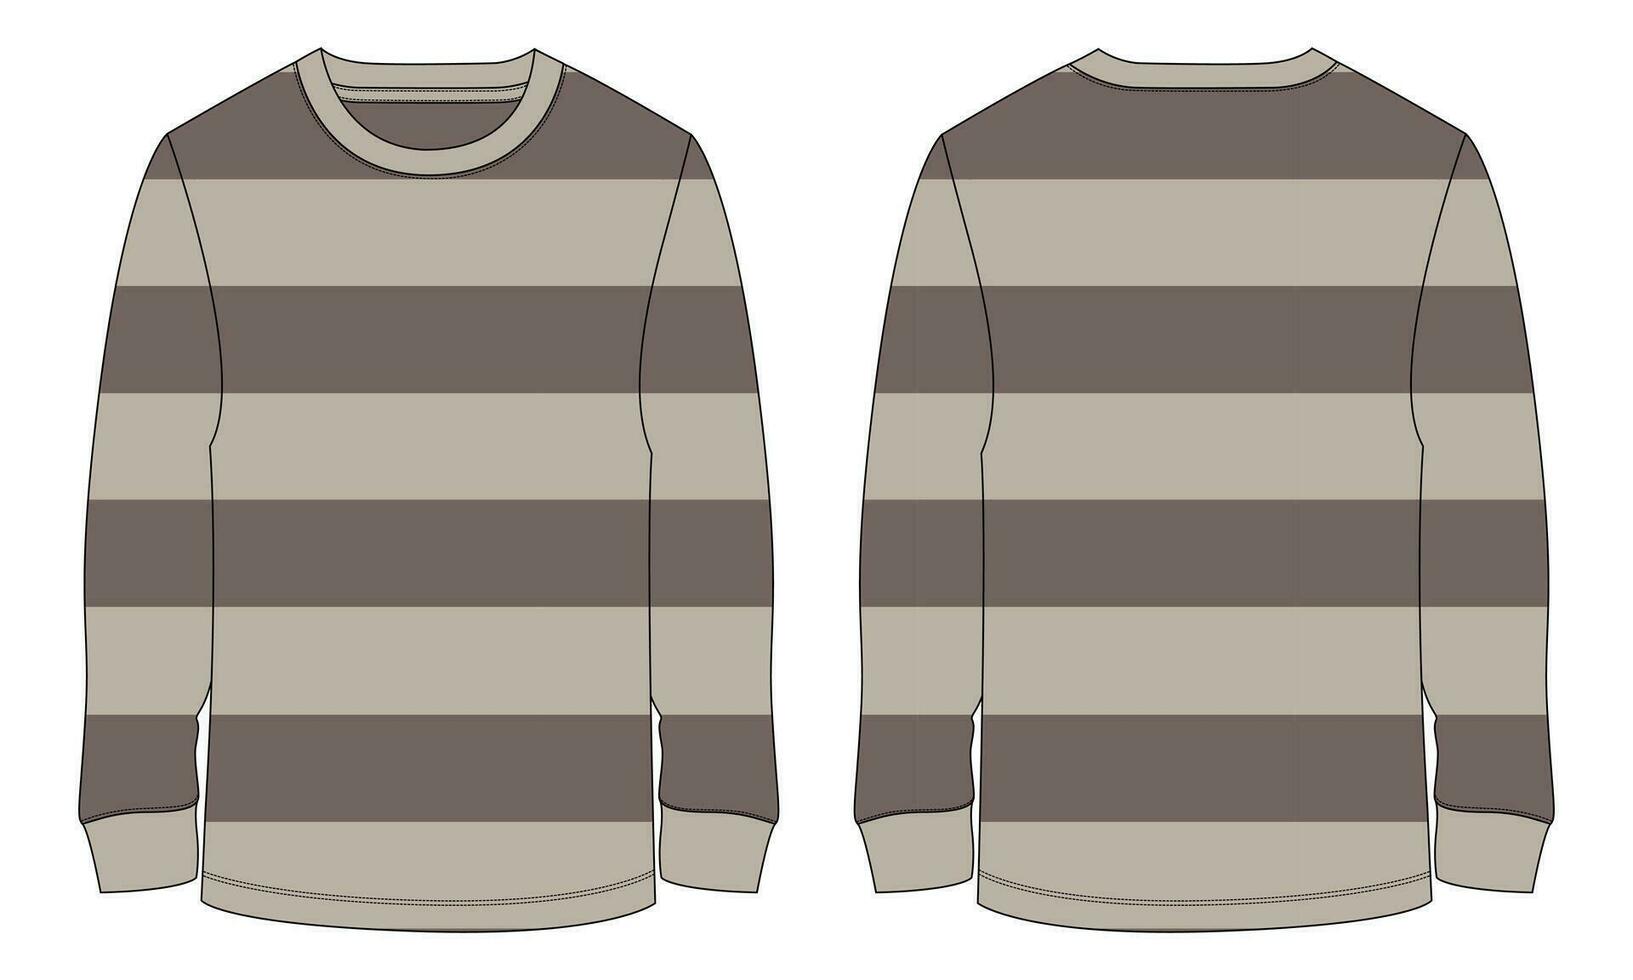 Long Sleeve T shirt With all over Stripe All Over Body Technical Fashion Flat sketch Vector Illustration Template Front And Back Views.